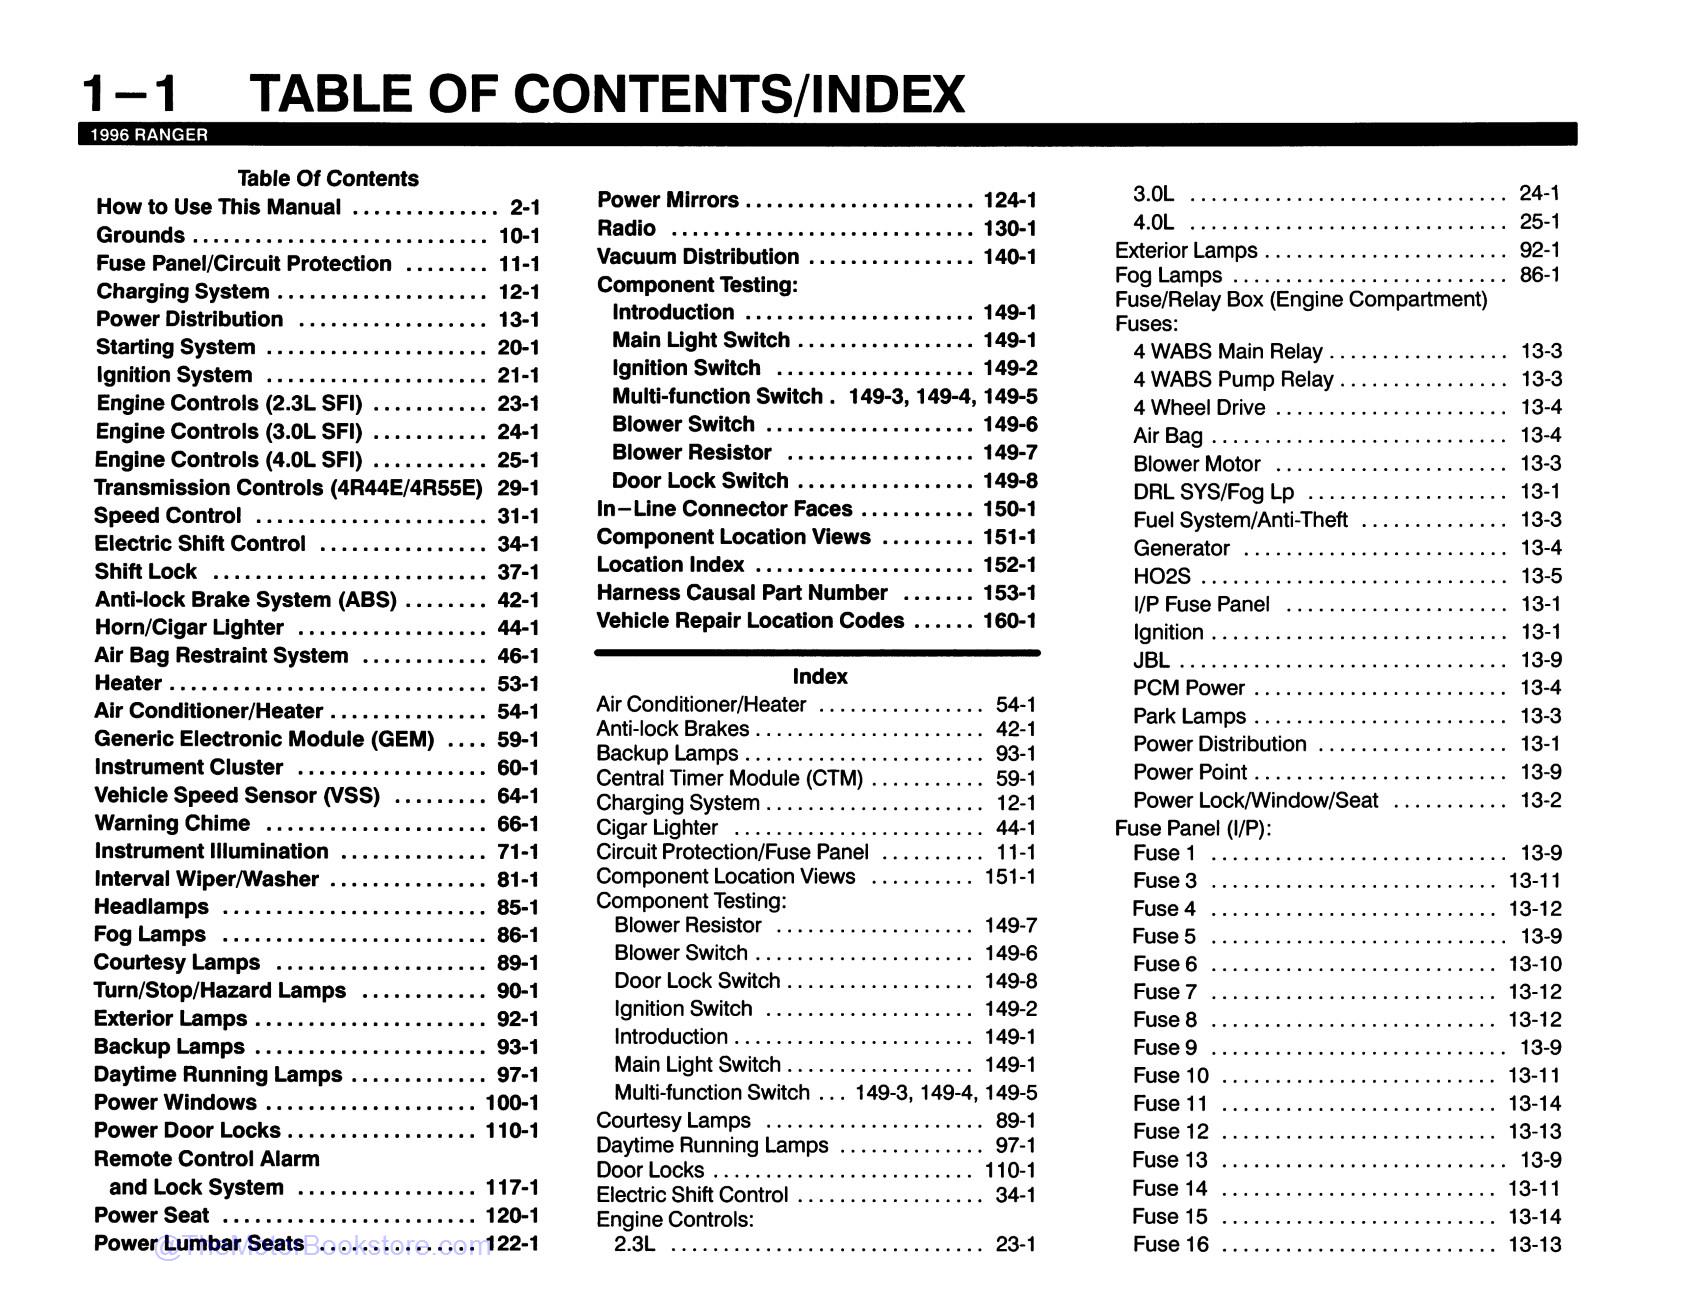 1996 Ford Ranger Electrical and Vacuum Troubleshooting Manual  - Table of Contents 1